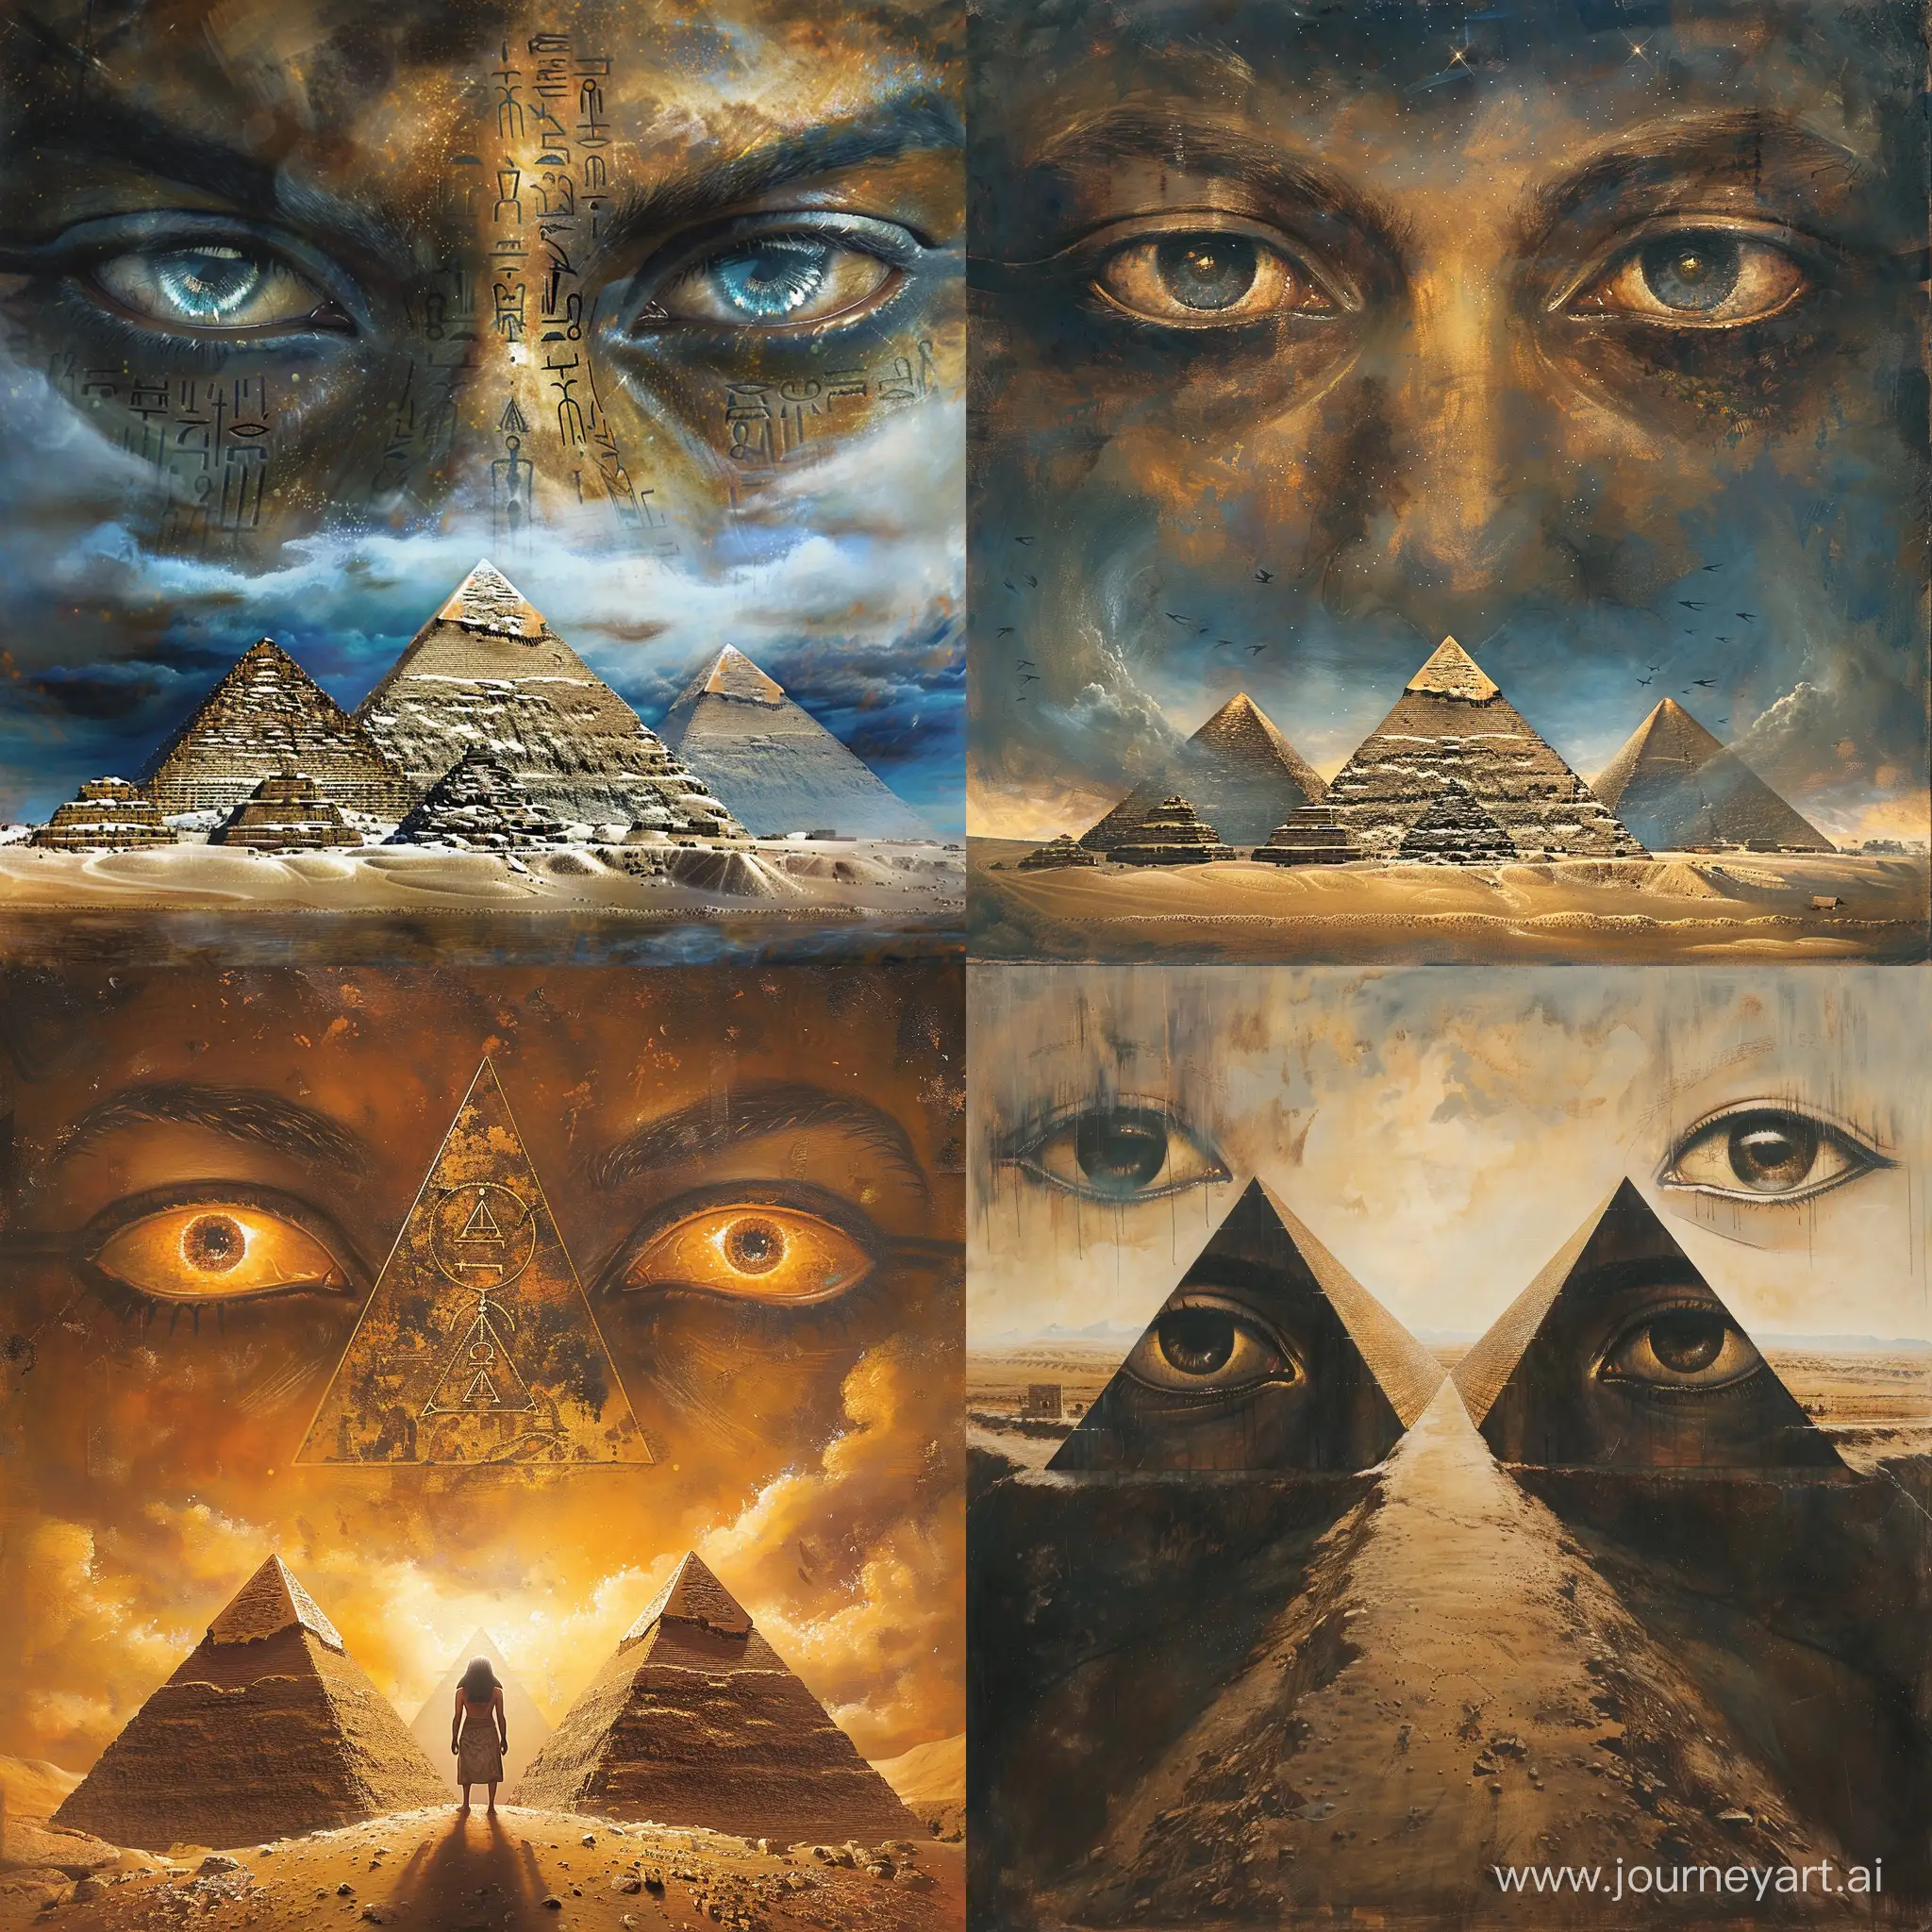 The dream is full of visions… The path of the three vertices will end, Horus stares intently Inside each of the pyramids.